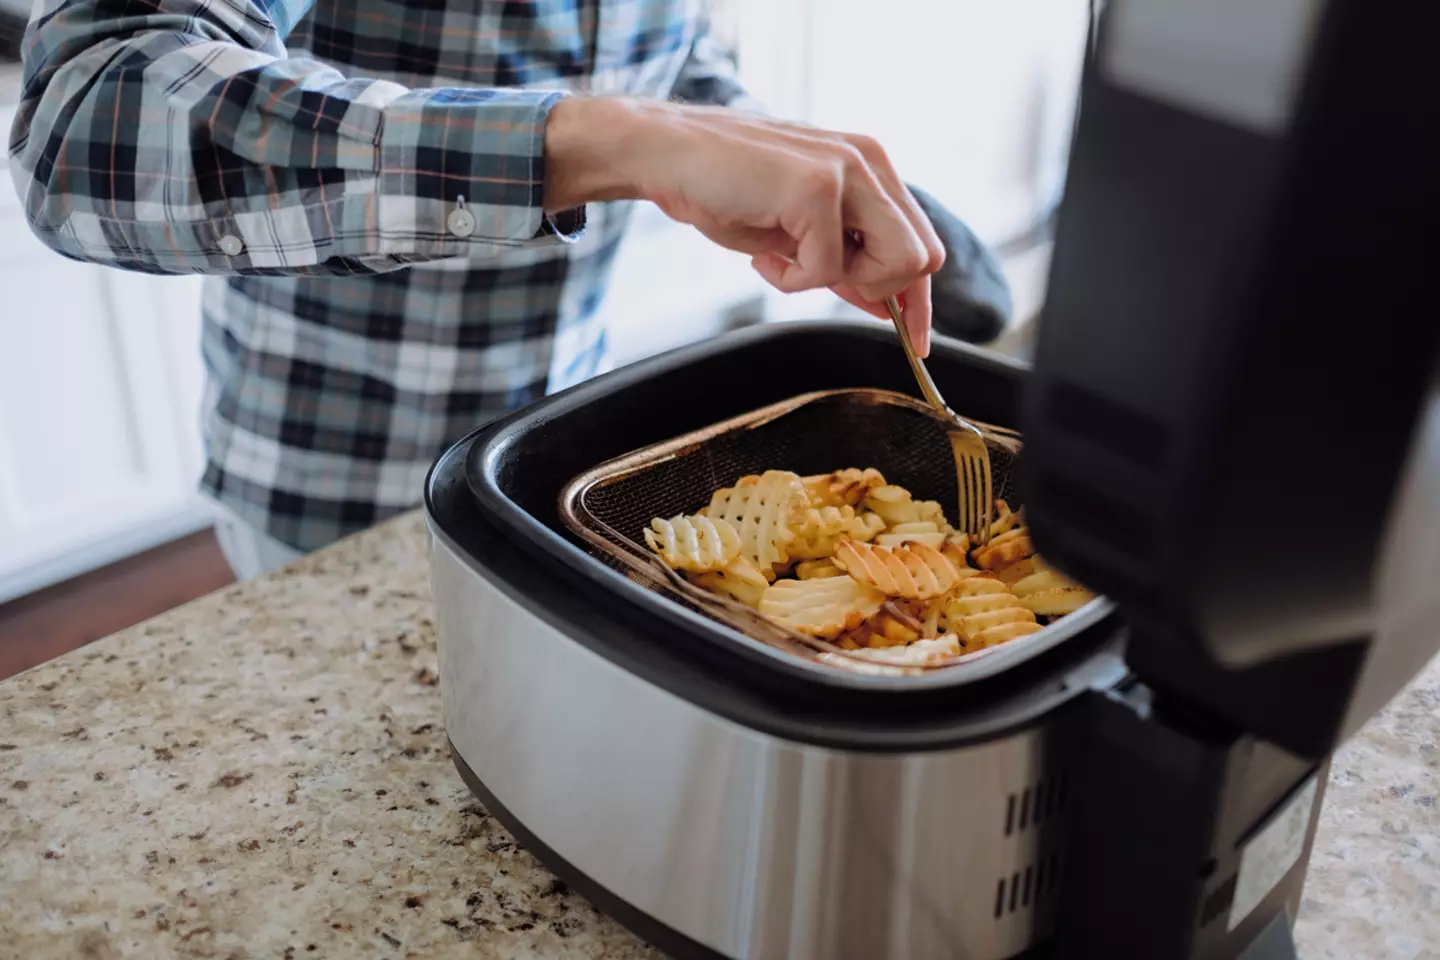 Air fryer life. (Getty Stock Image)